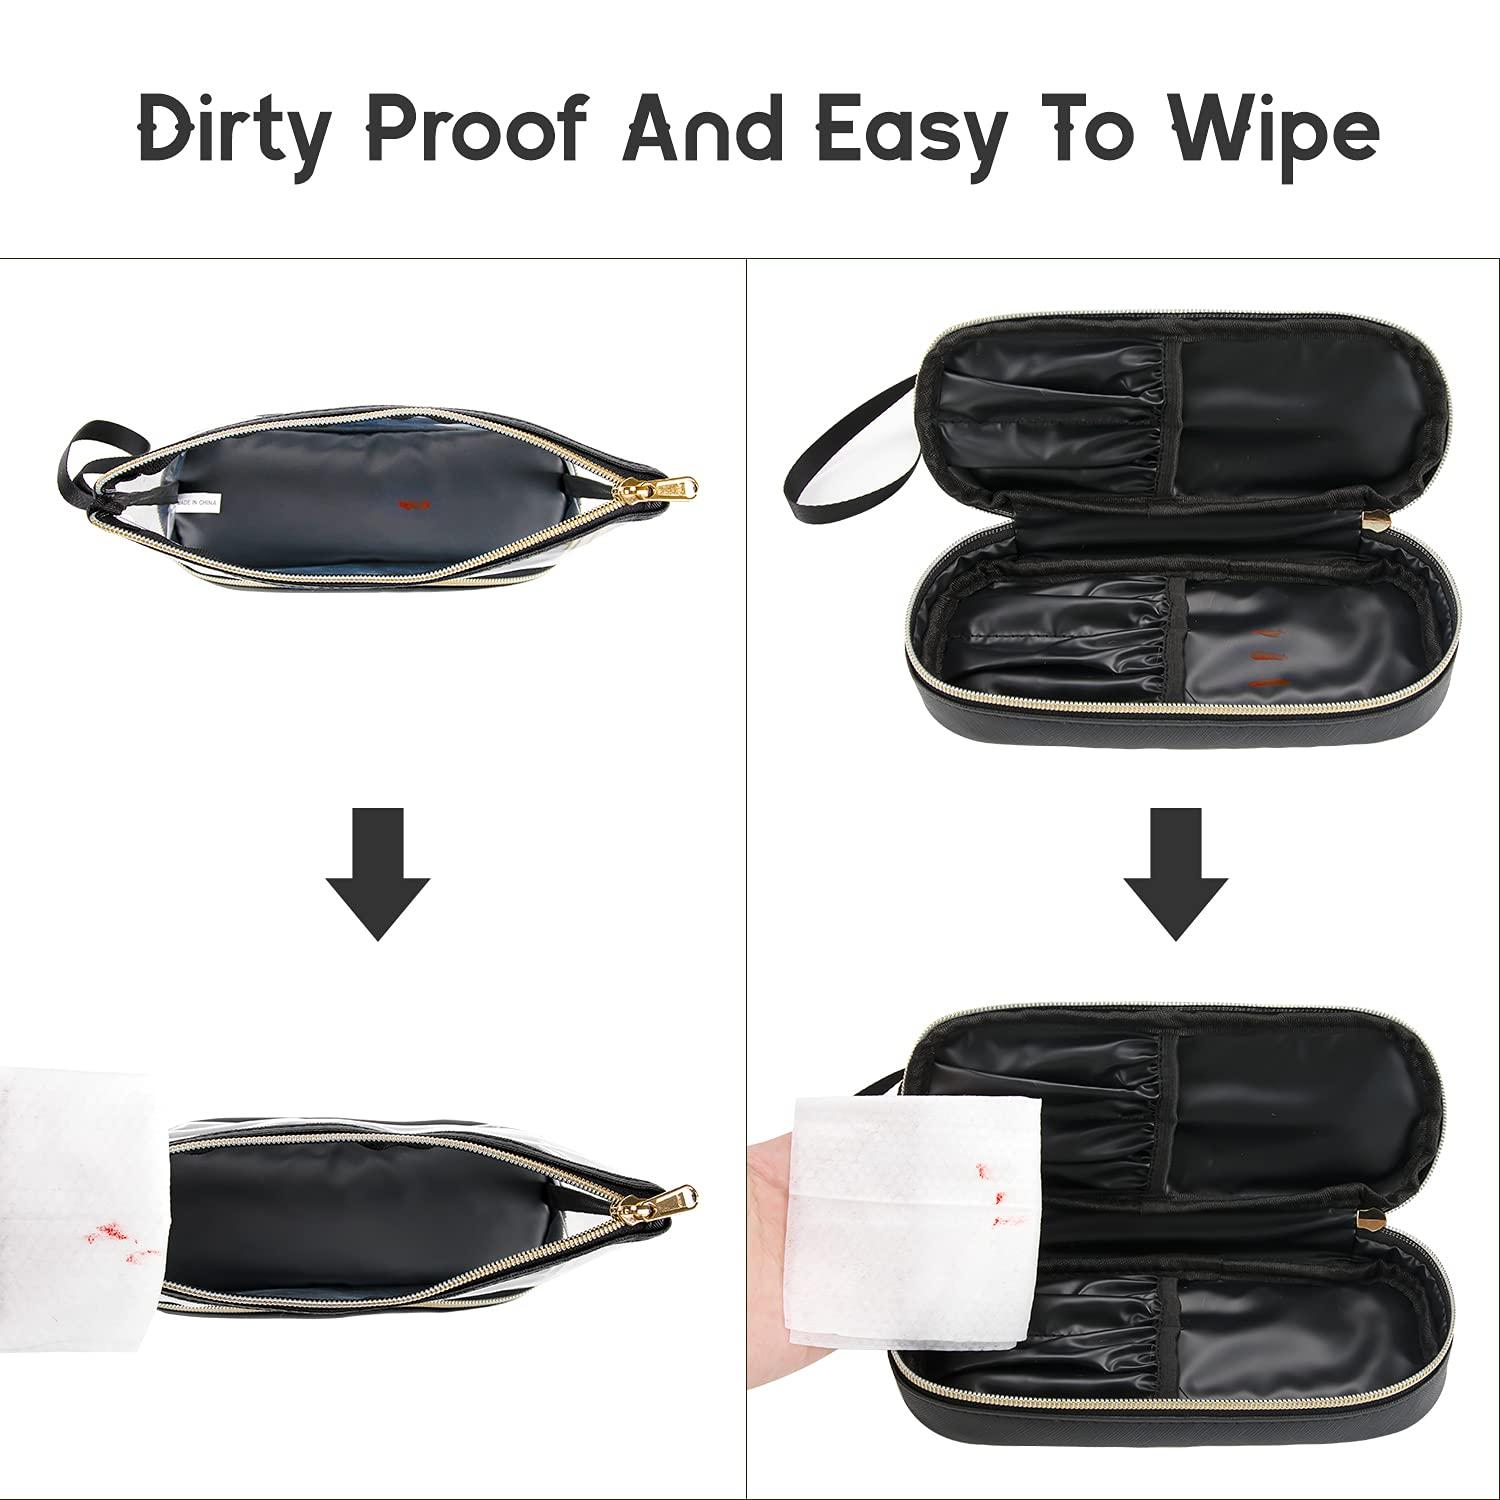 PVC Makeup Bags - The One Packing Solution